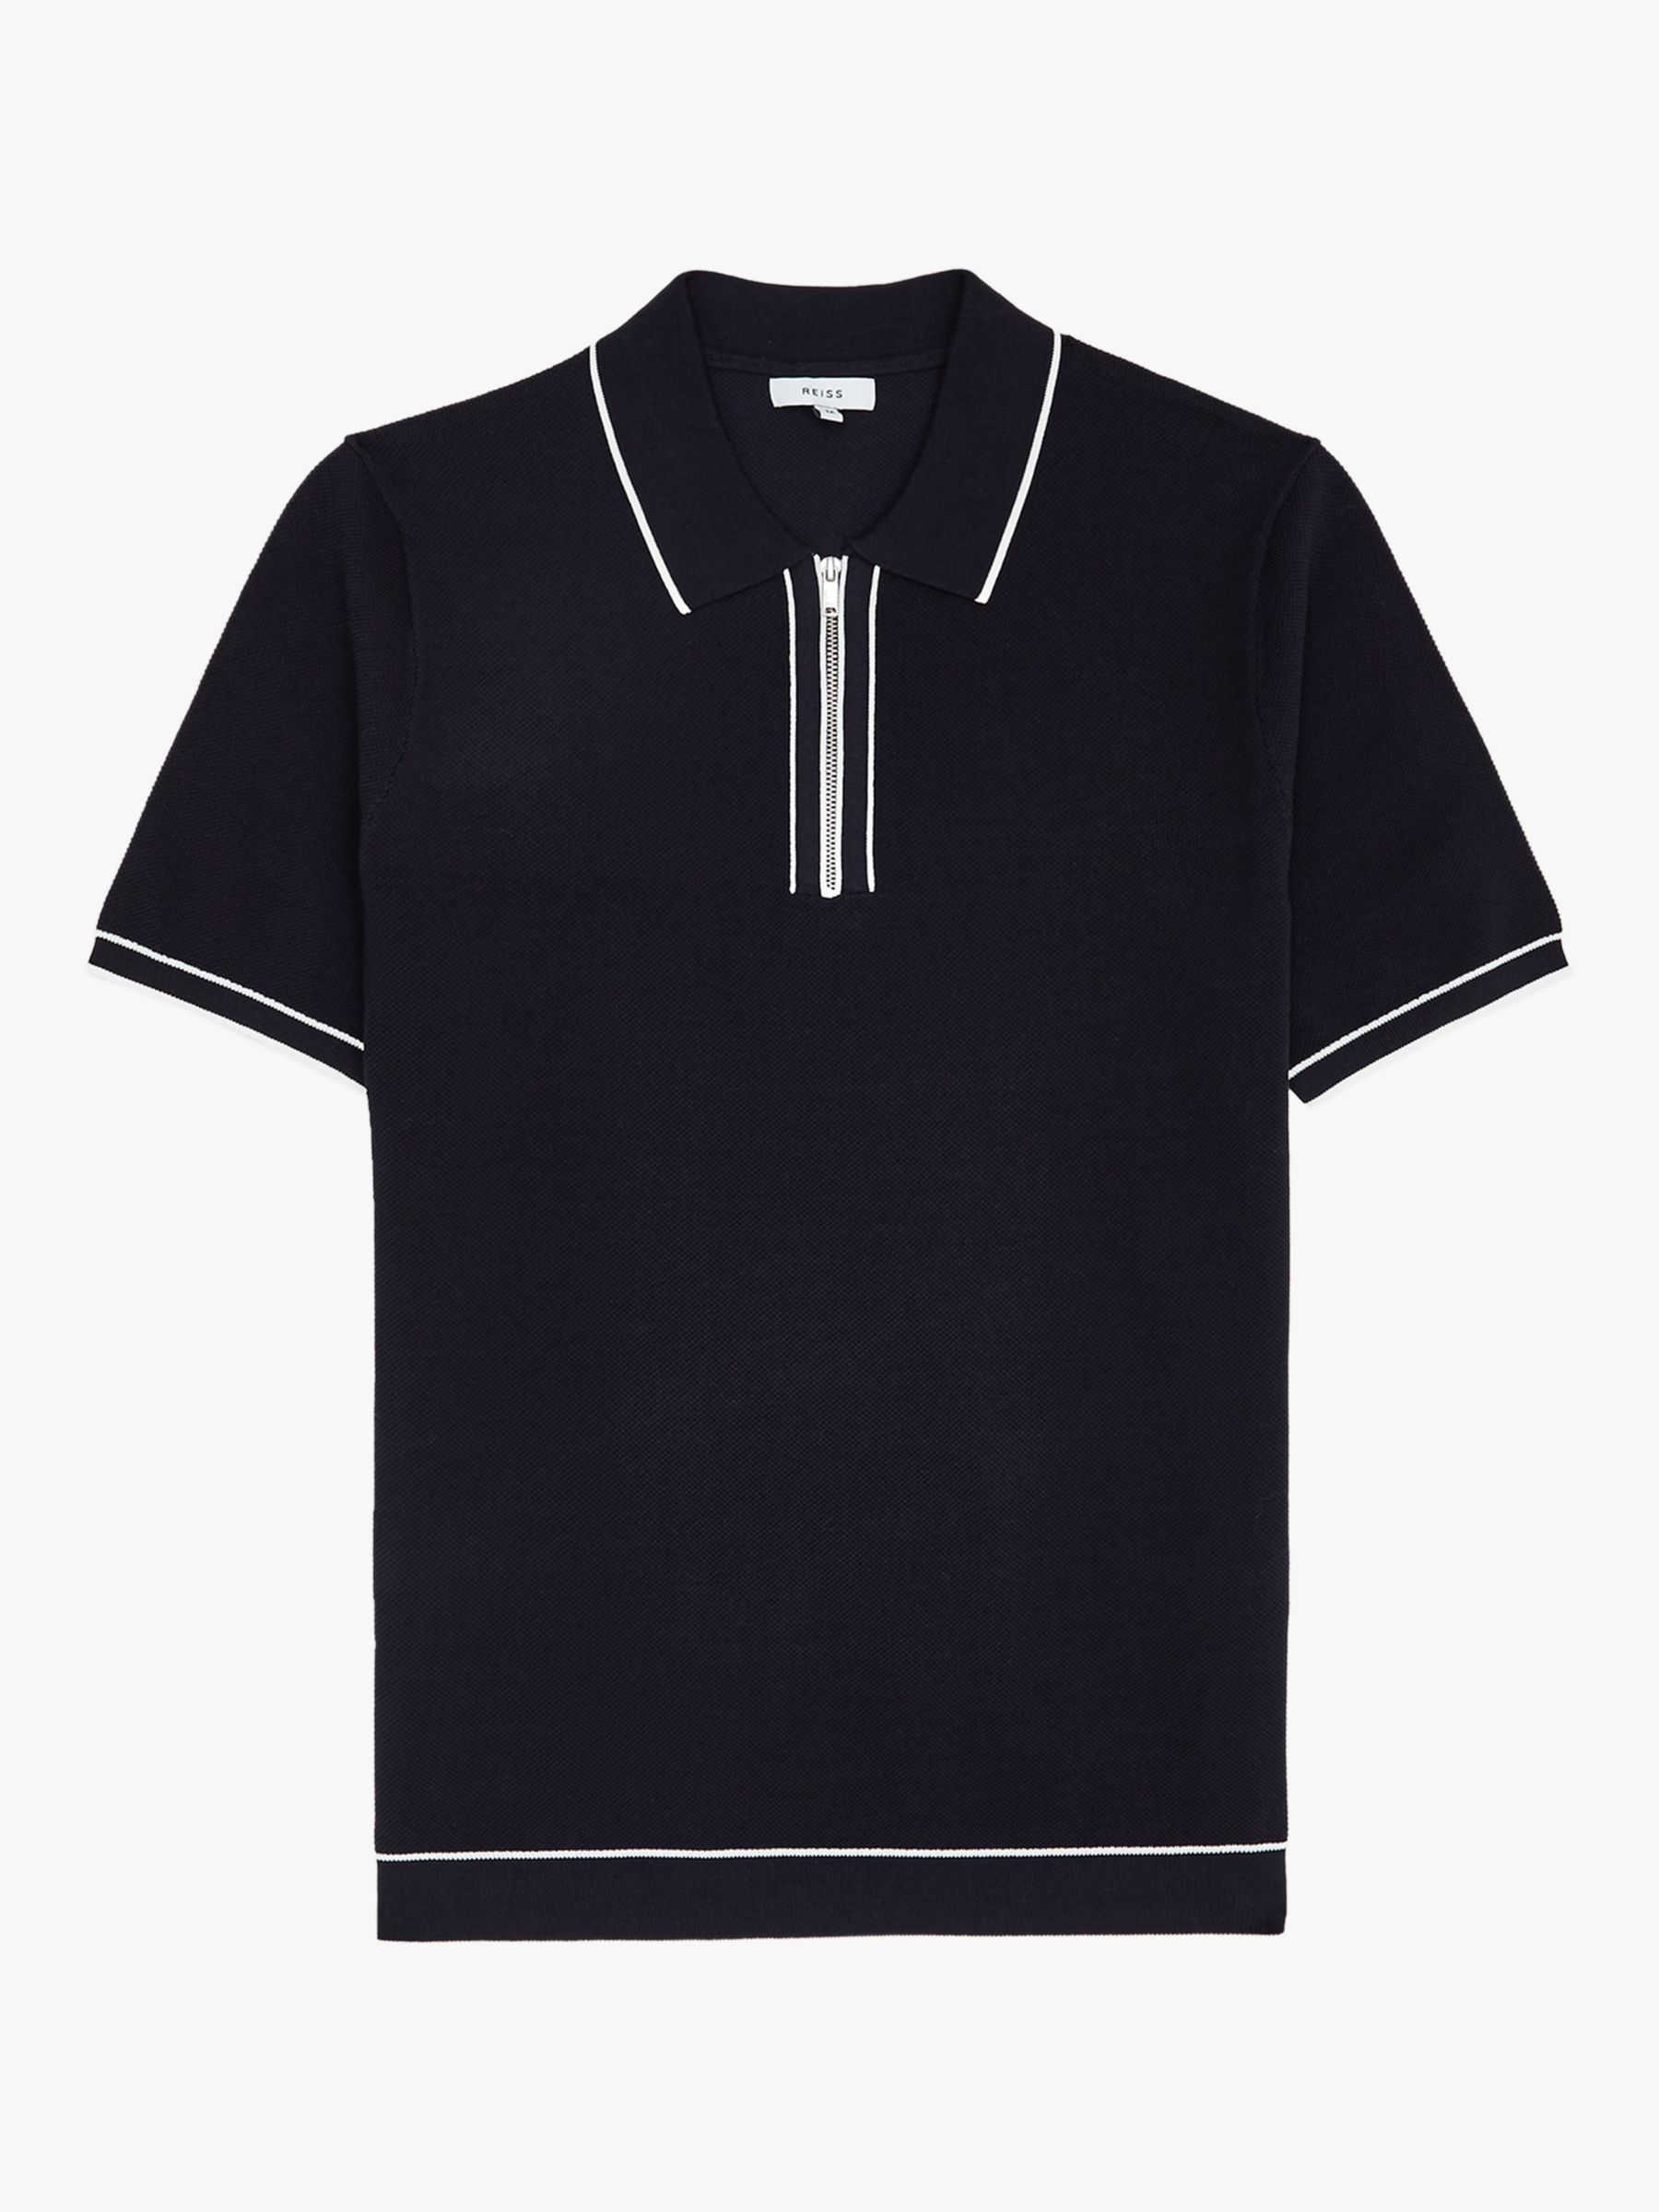 Reiss Lyle Tipped Zip Neck Polo Shirt